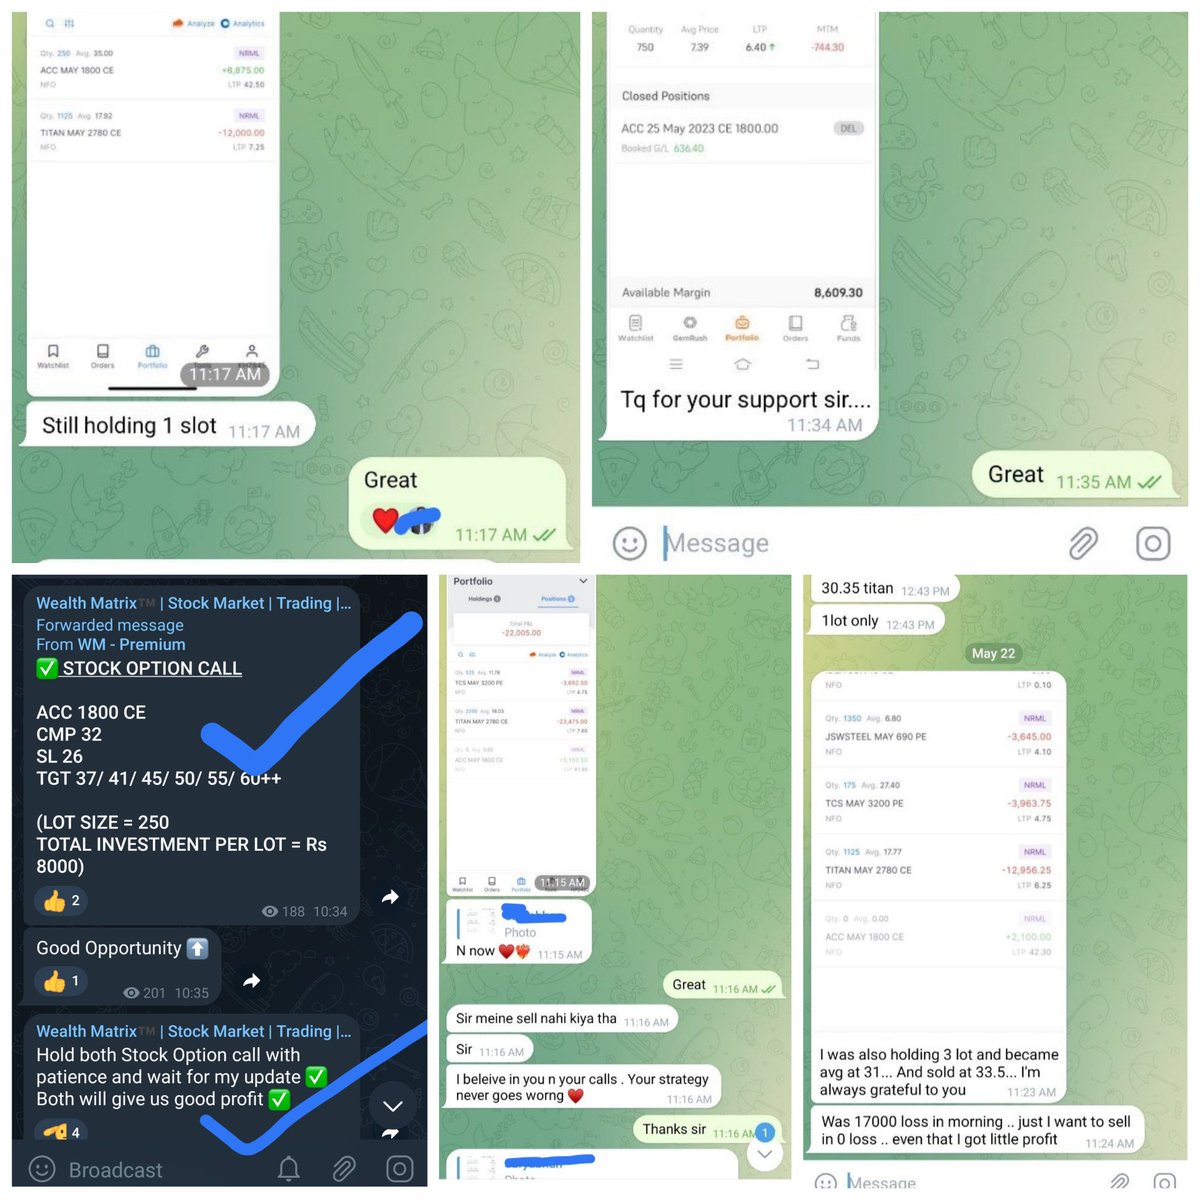 ✅ STOCK OPTION CALL

ACC 1800 CE
CMP 32
SL 26
TGT 37/ 41/ 45/ 50/ 55/ 60++

(LOT SIZE = 250
TOTAL INVESTMENT PER LOT = Rs 8000)

Stock call given on 17th may. Today all Targets Achieved ✅ 

Money Doubled 😍😍😍

For LIVE updates - t.me/wealthmatrixx

#stockmarket #adani